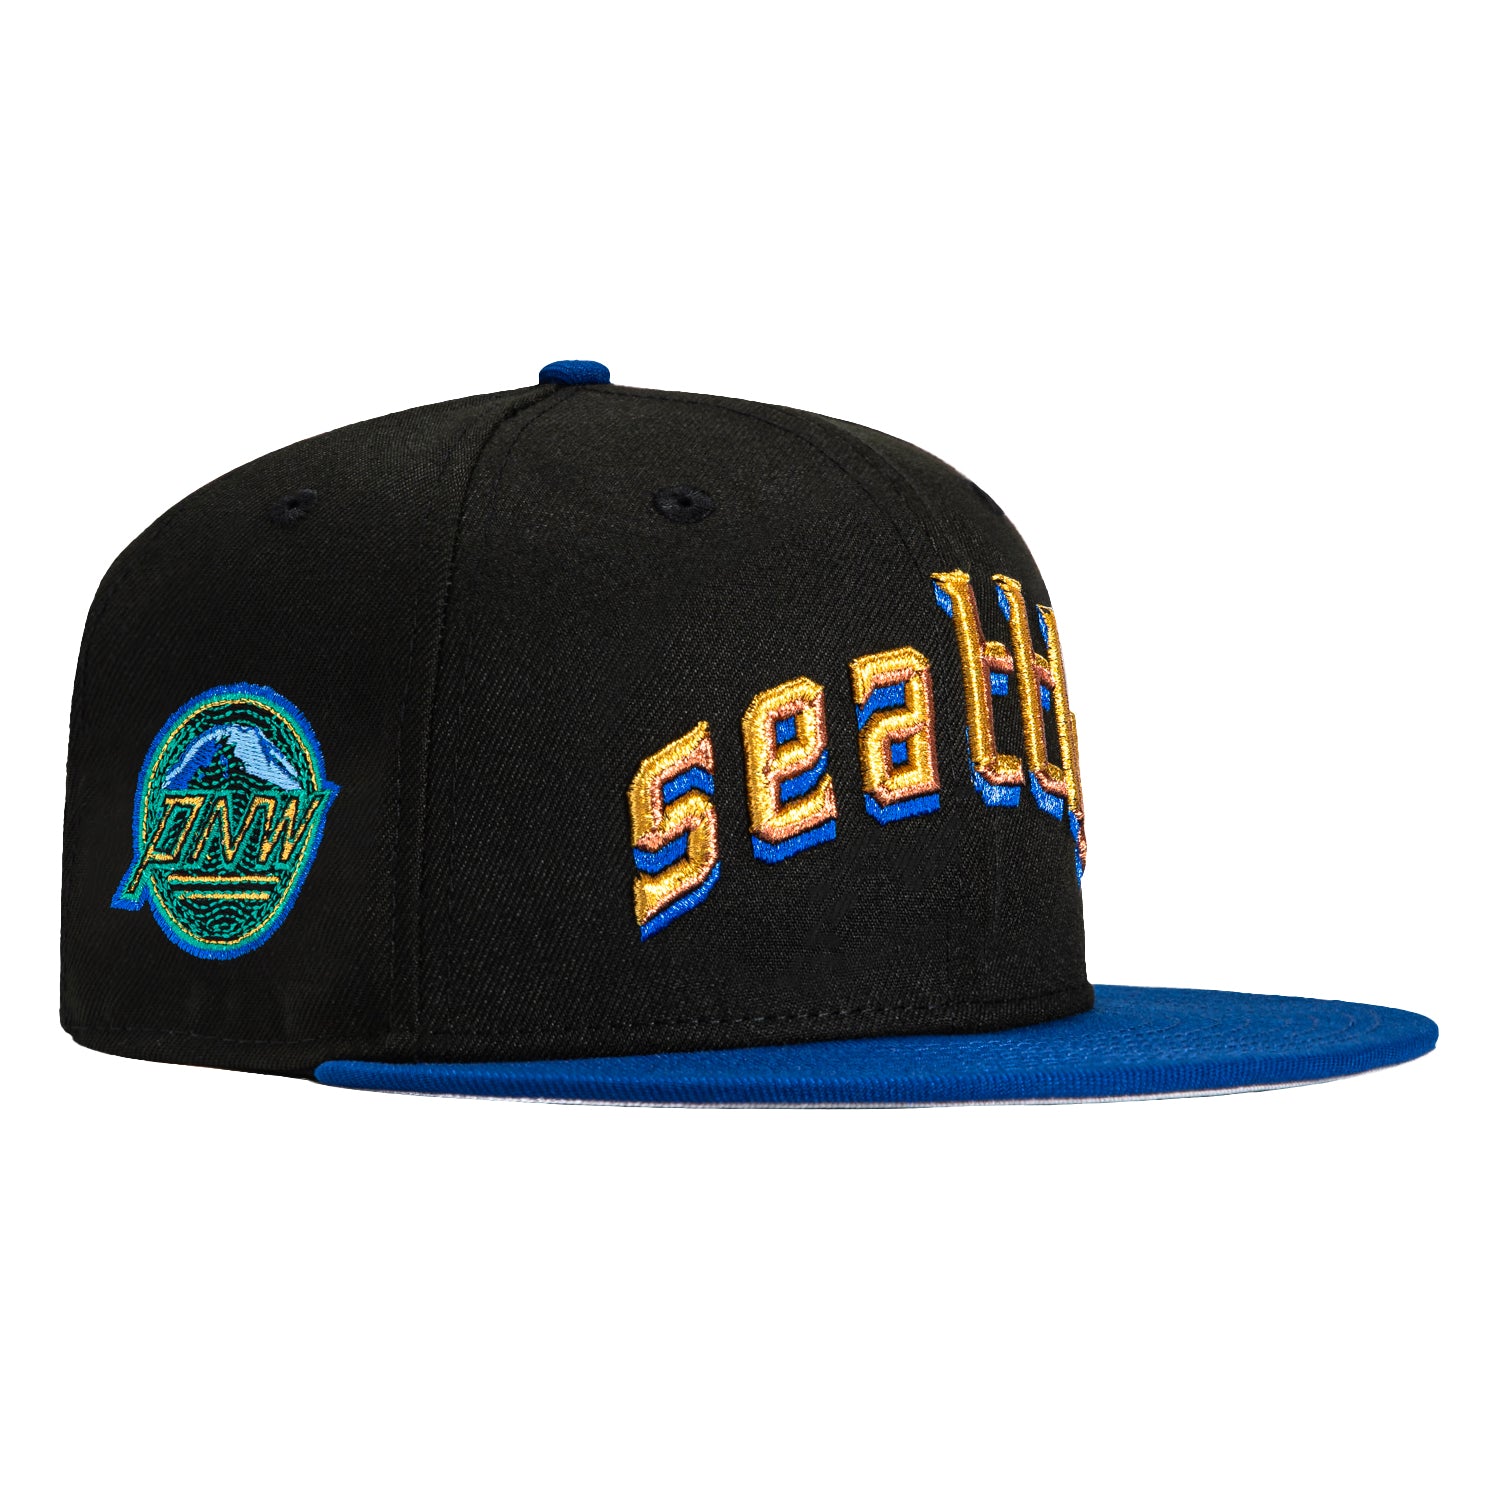 New Era 9FIFTY Seattle Mariners City Connect Snapback Hat Royal Blue